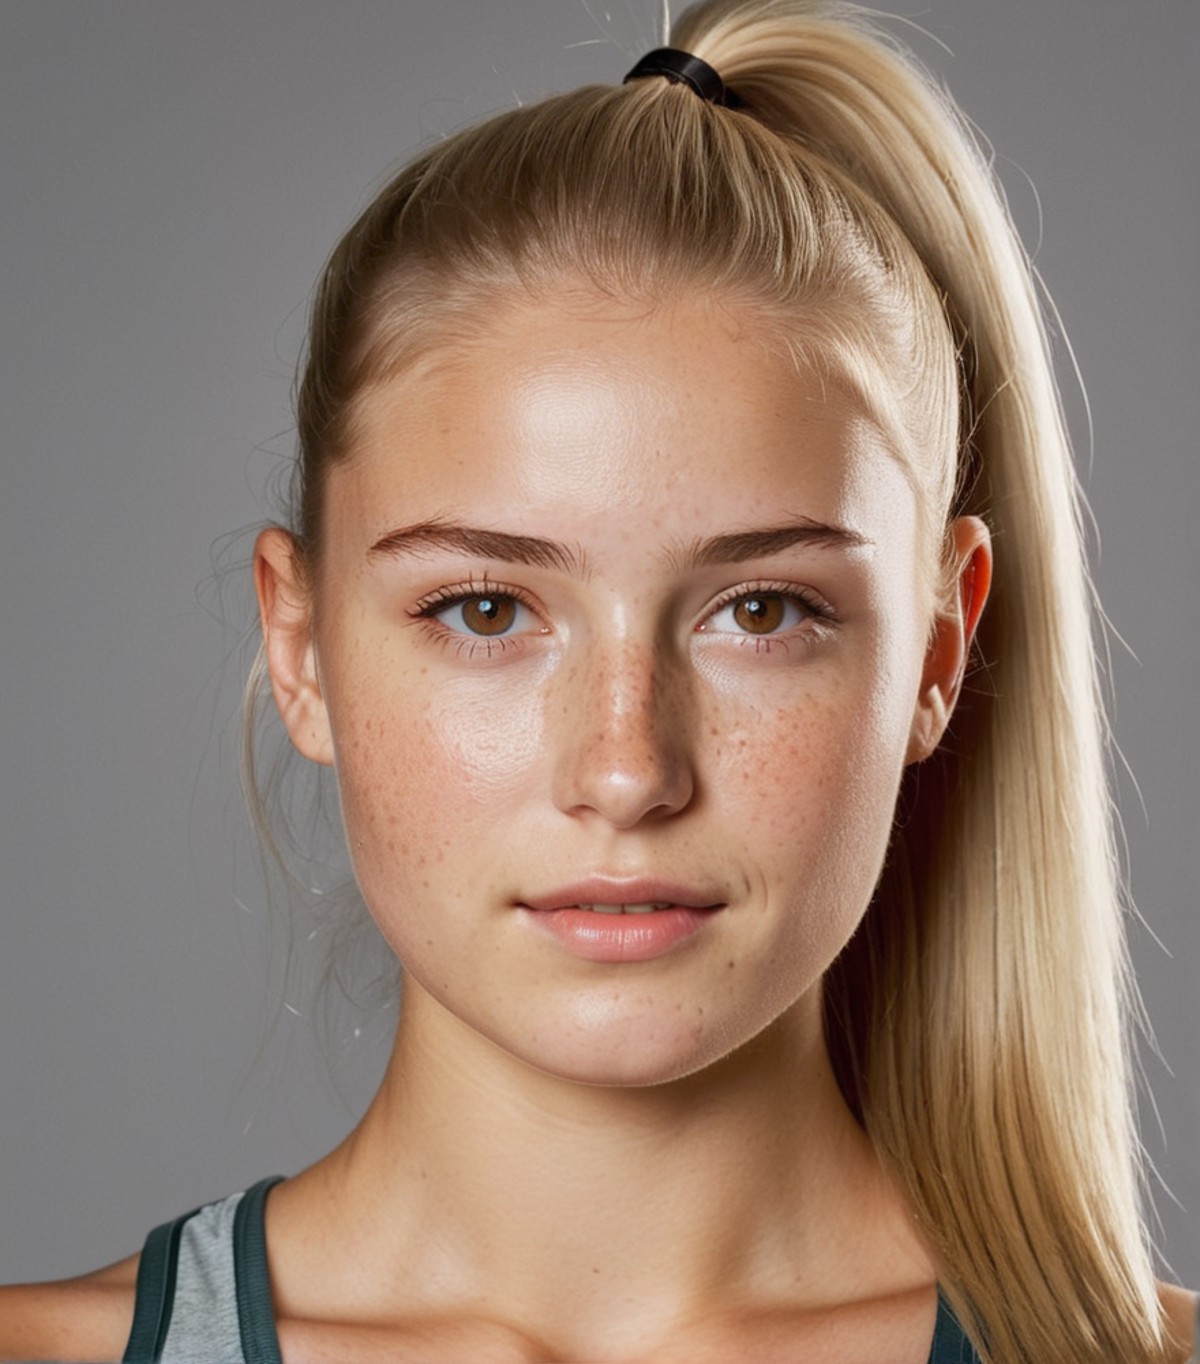 photo of a 20 years old girl with brown shiny eyes, blonde hair in a ponytail, rounded cheeks with some freckles, fit stro...